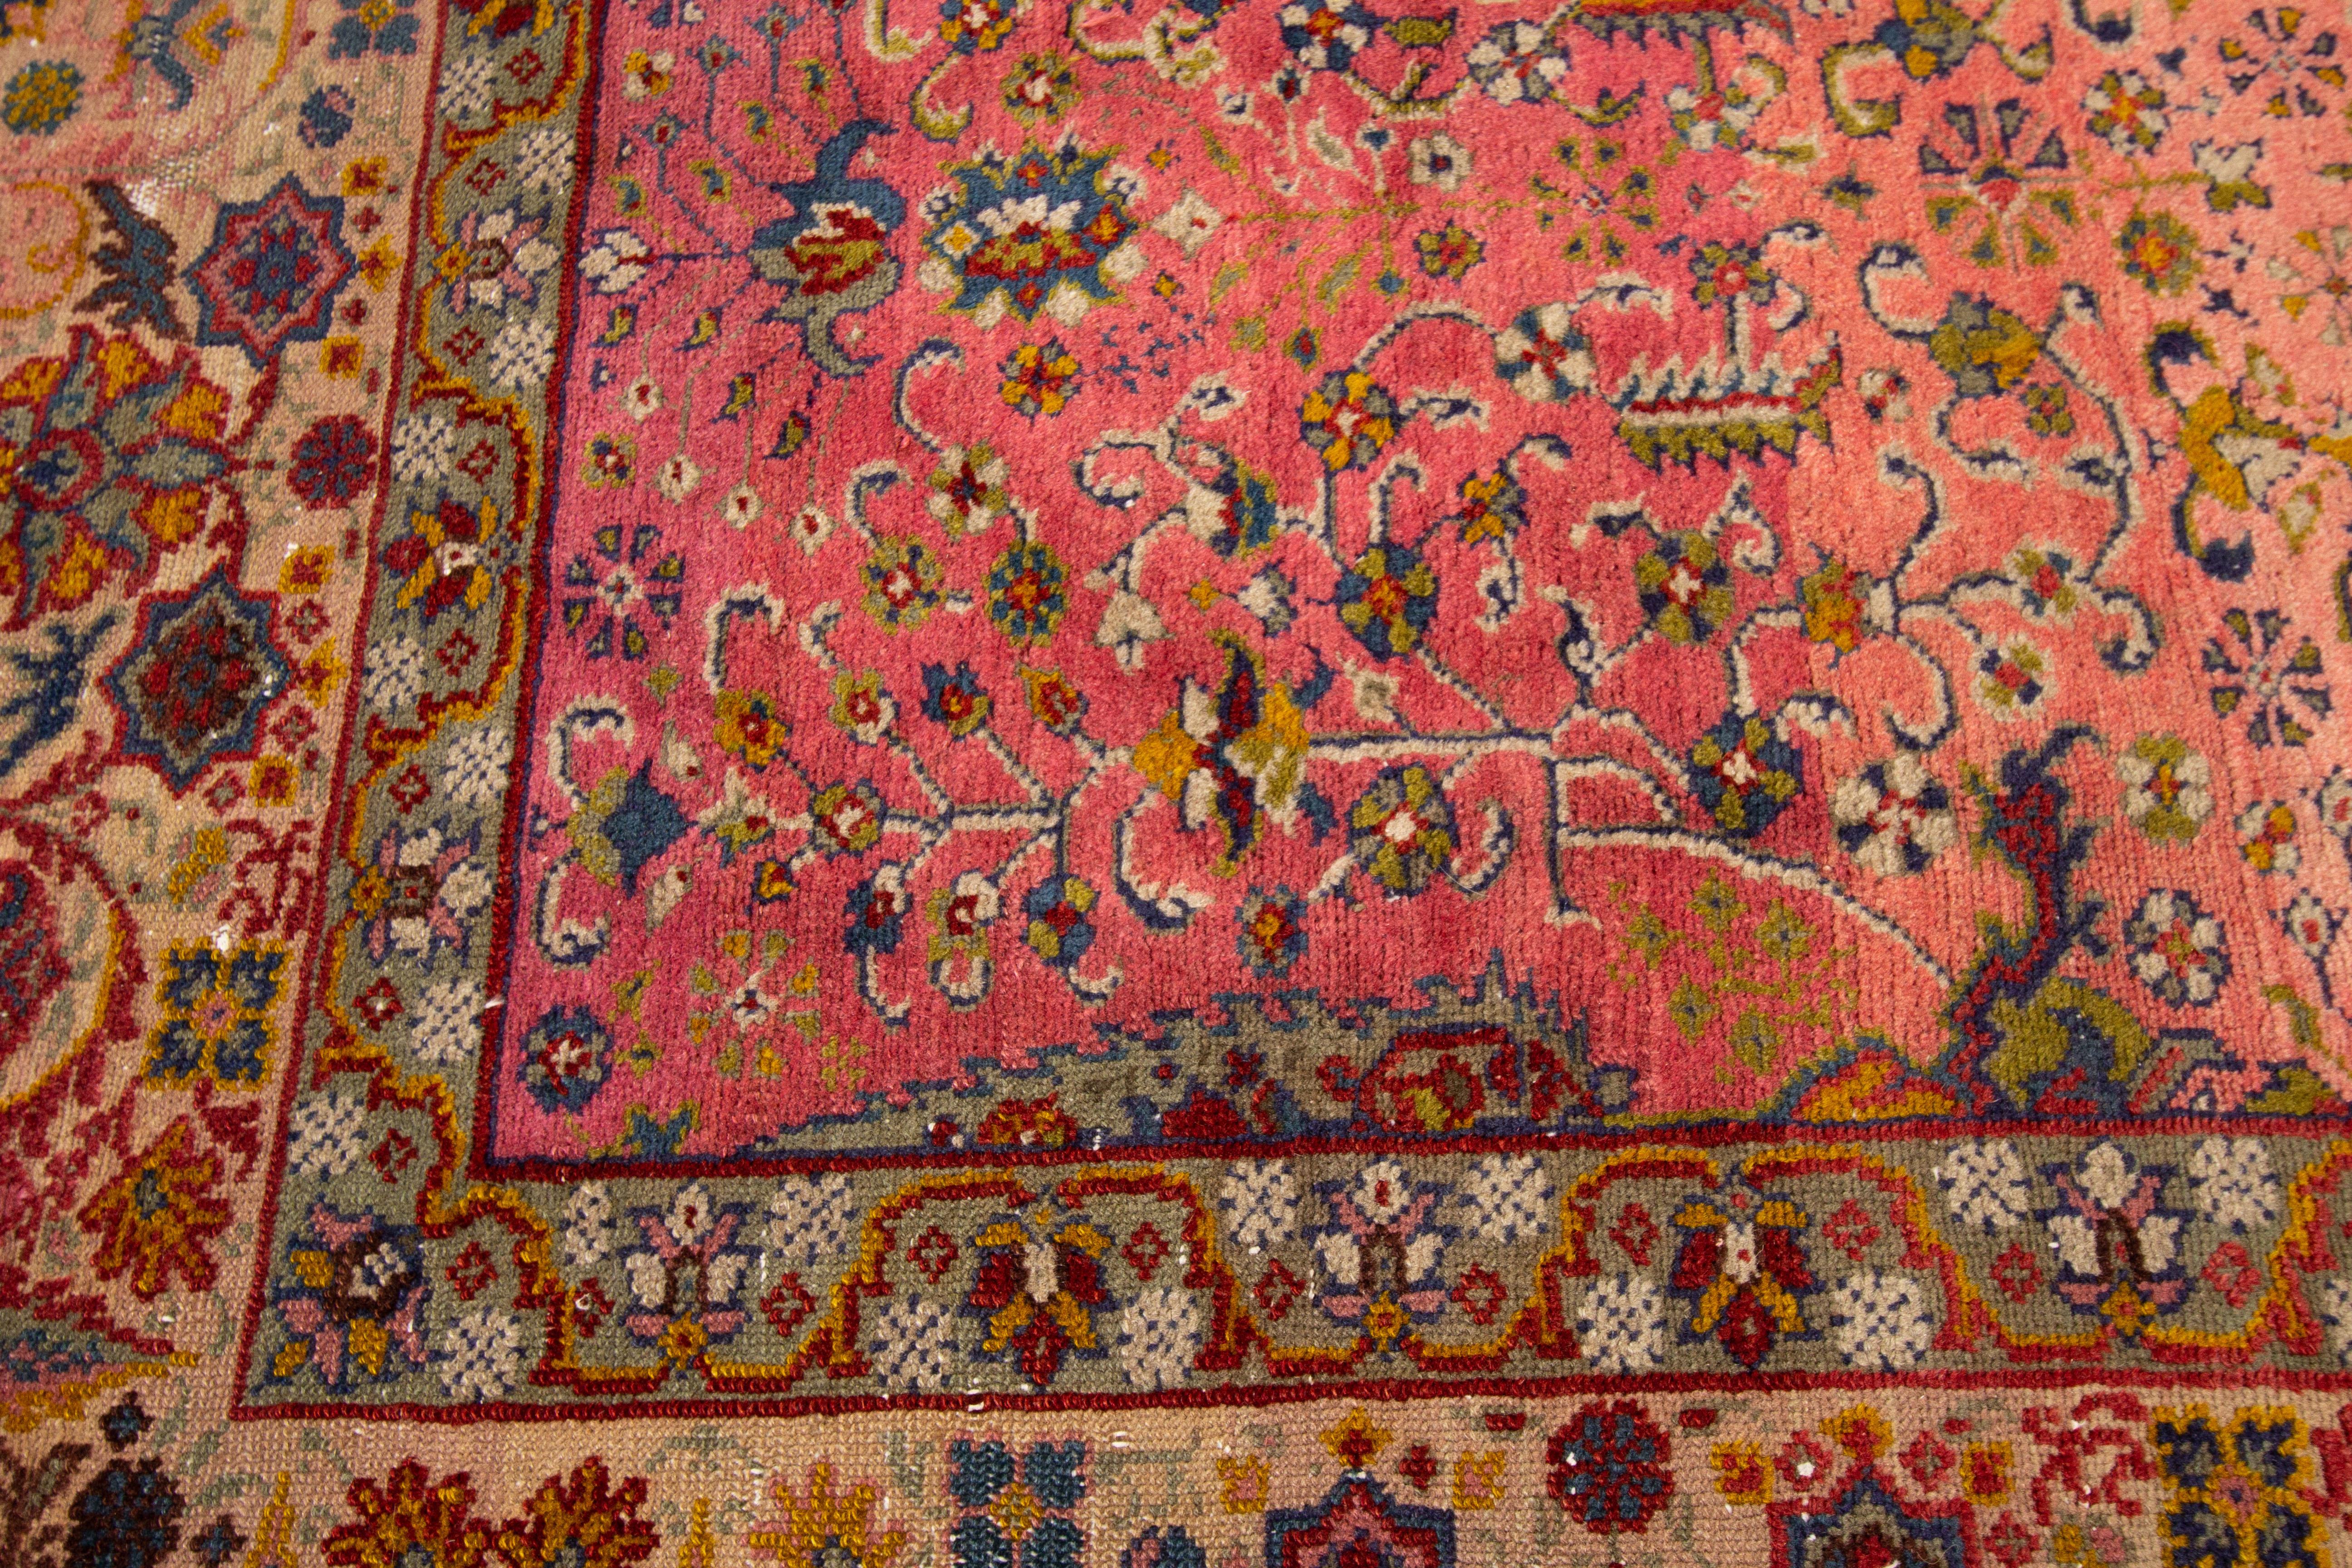 Beautiful Antique Marbediah Israeli handknotted wool rug with a Roseberry color field. This piece has a beige frame and multicolor accents in an all-over geometric floral design.

This rug measures: 7'4